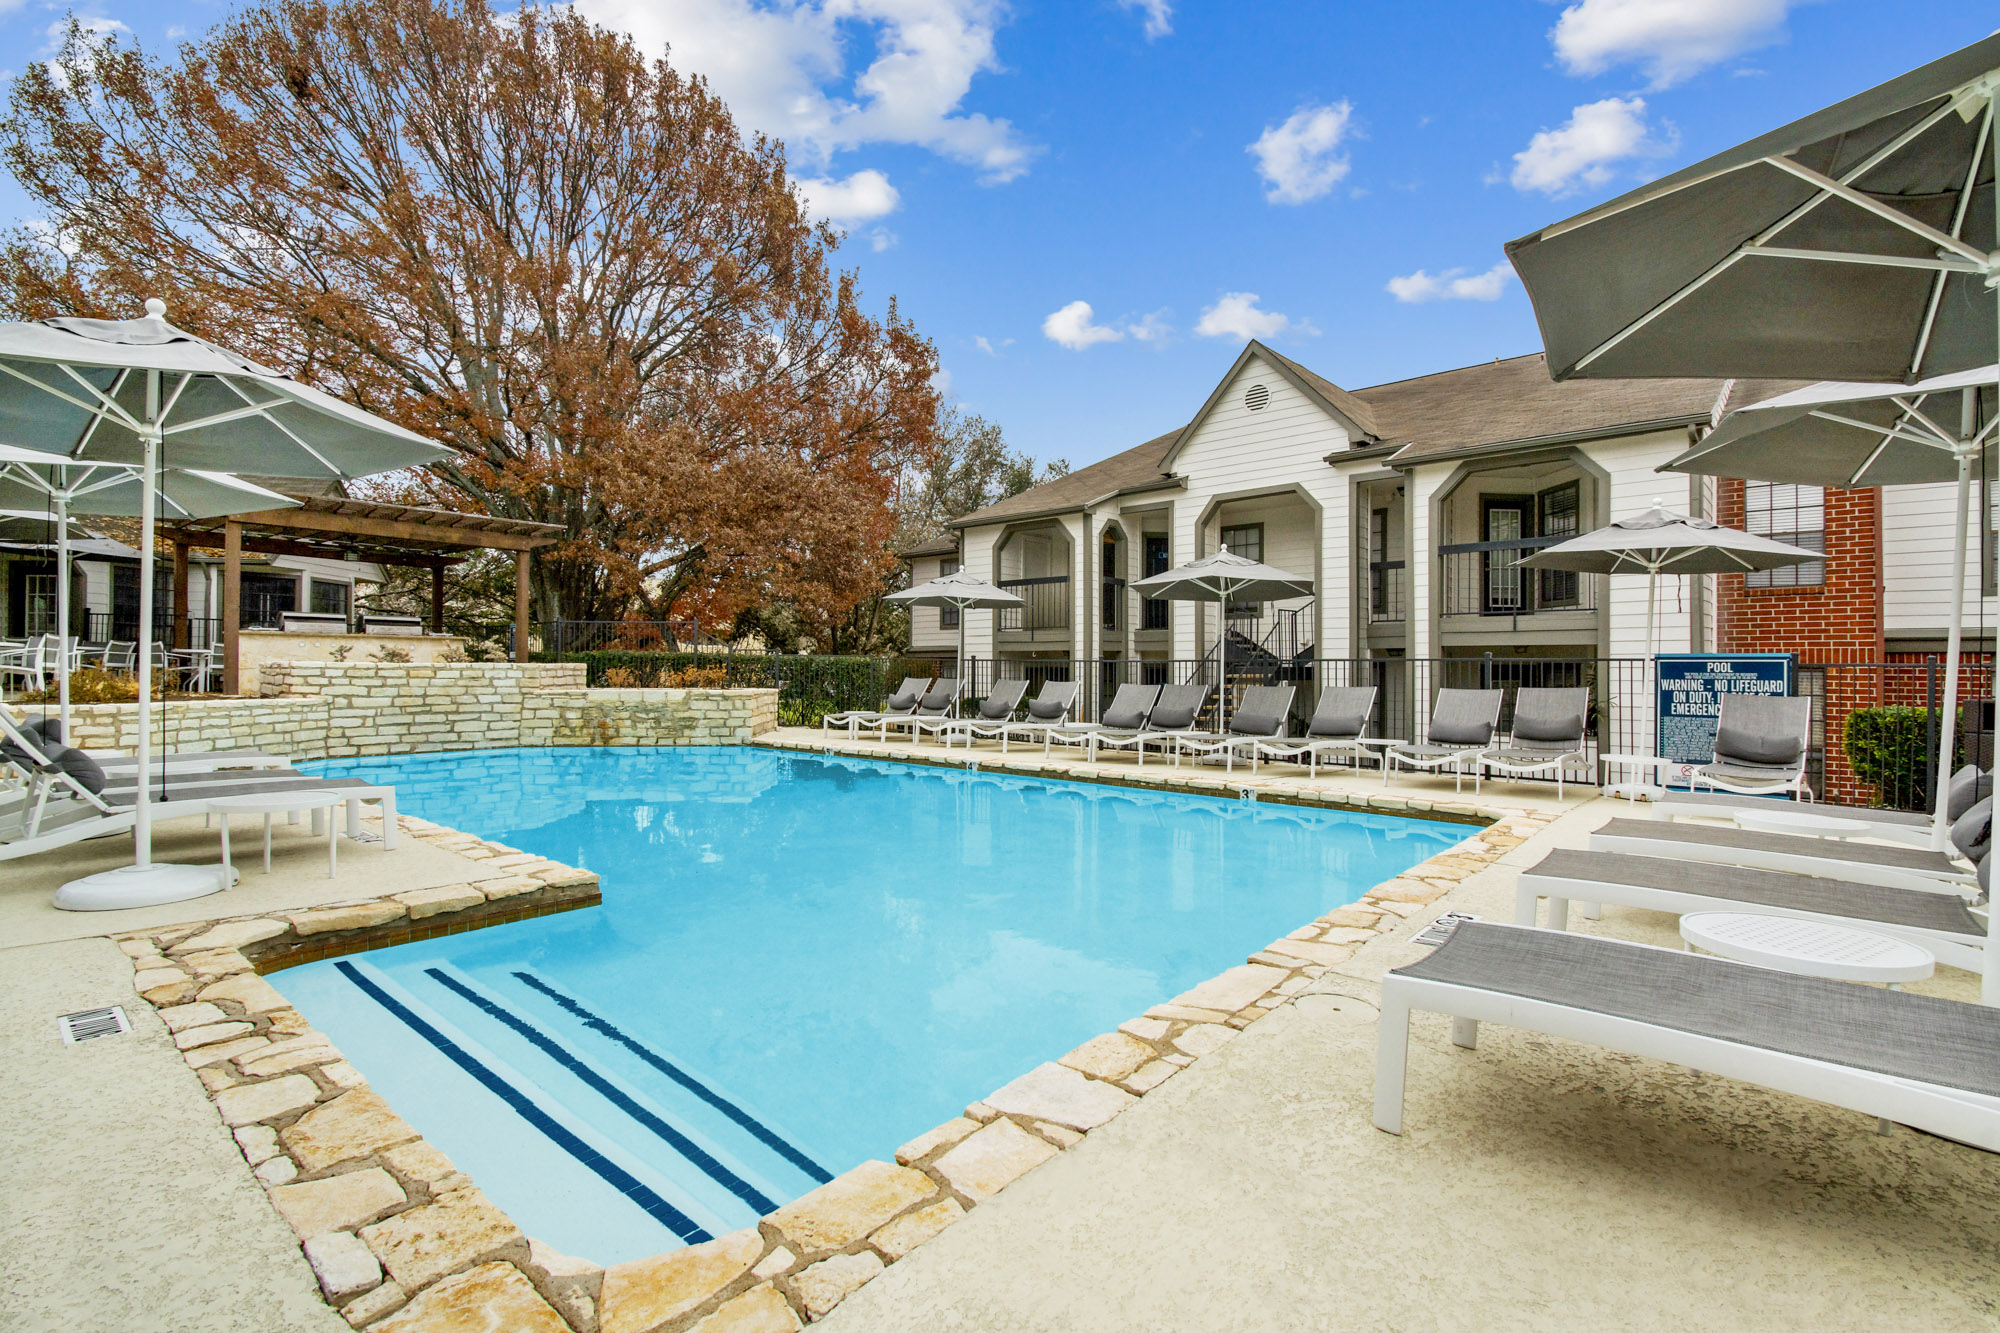 The pool at The Arbors of Wells Branch in Austin, Texas.